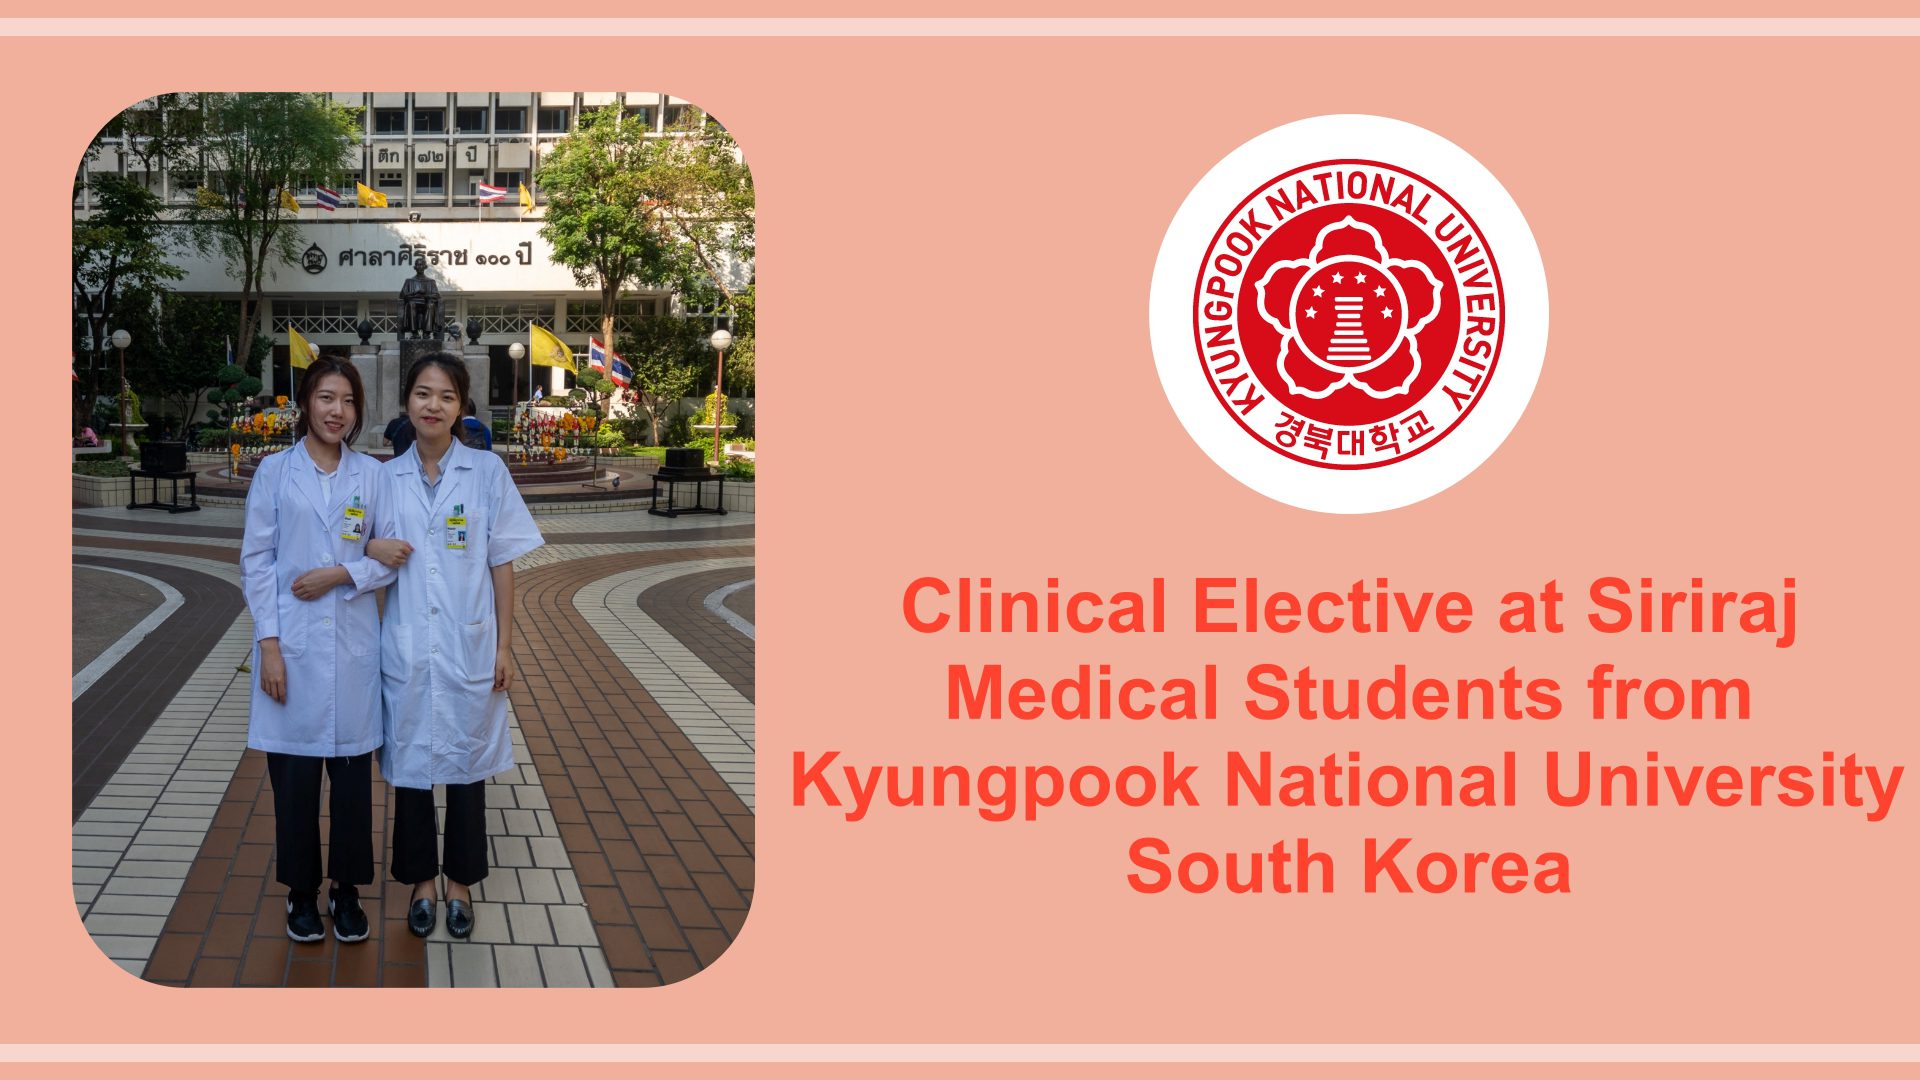 Clinical Elective for Medical Students from KNU, South Korea